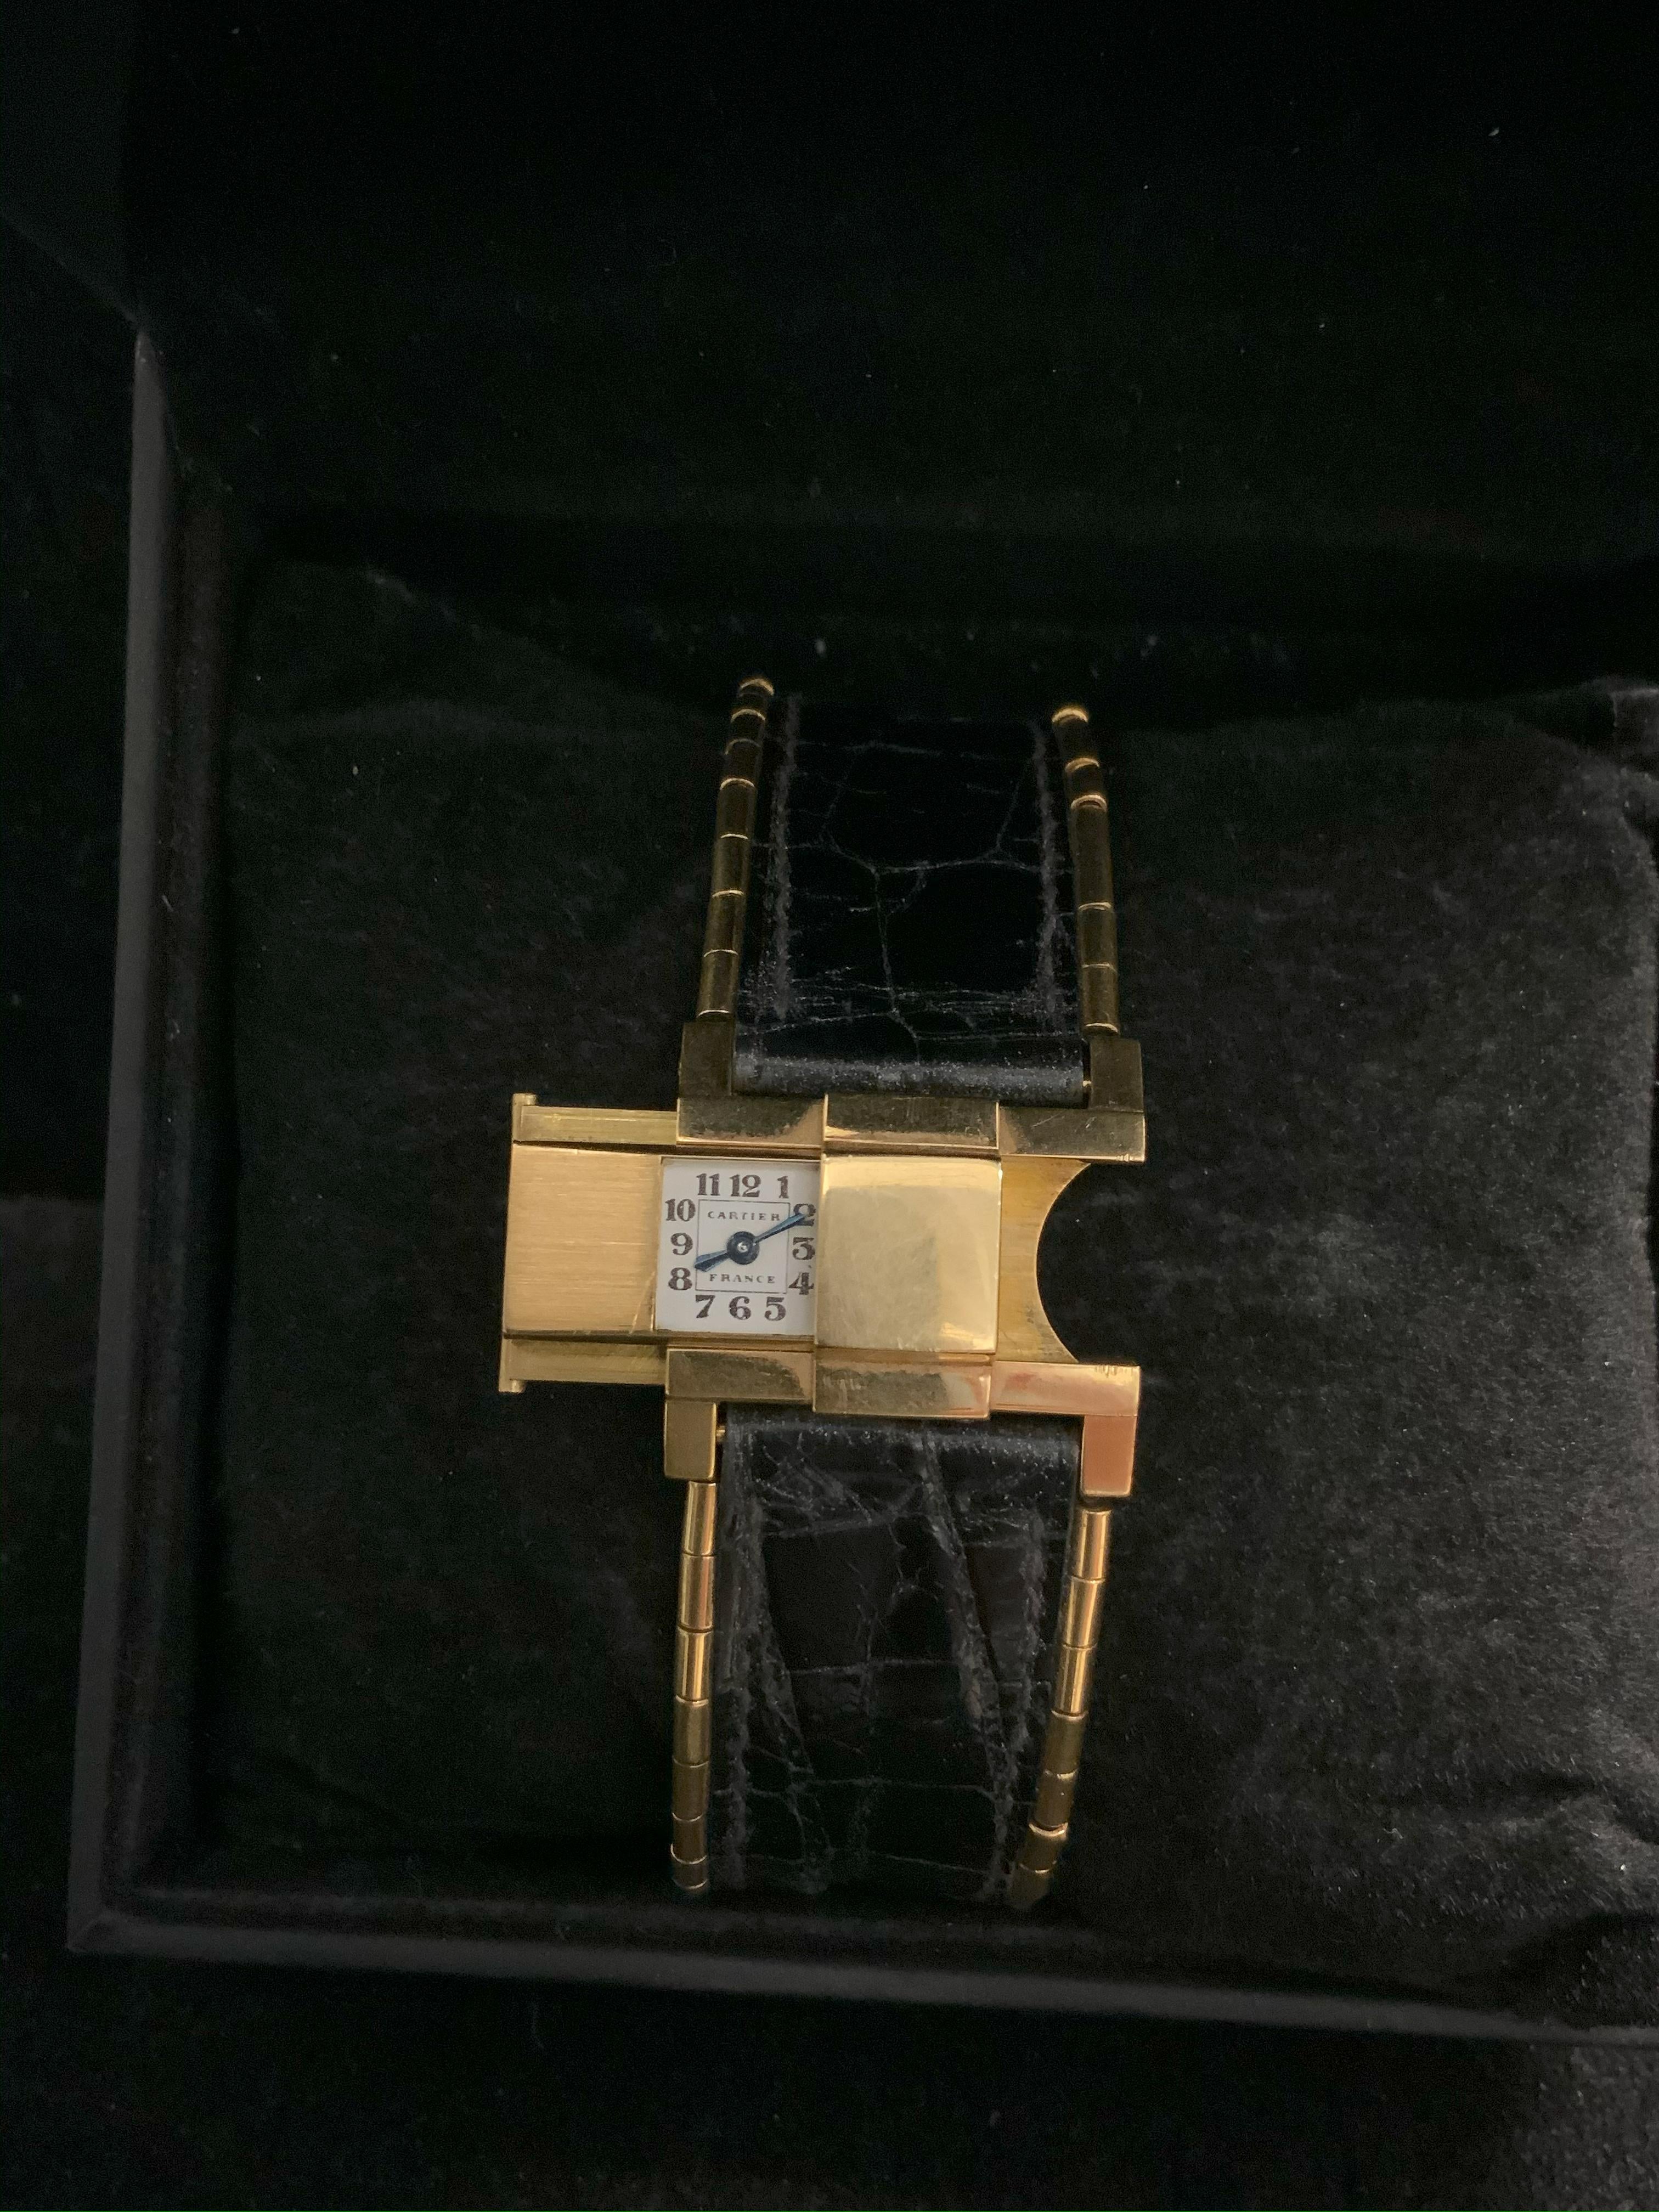 CARTIER Slide Watch w/ 18K Yellow Gold & Hidden Watch Face

The joy of wearing a piece of art on your wrist is within reach when you grab this Cartier Slide Watch. This unisex timepiece features a beautiful 18K Yellow Gold case that measures